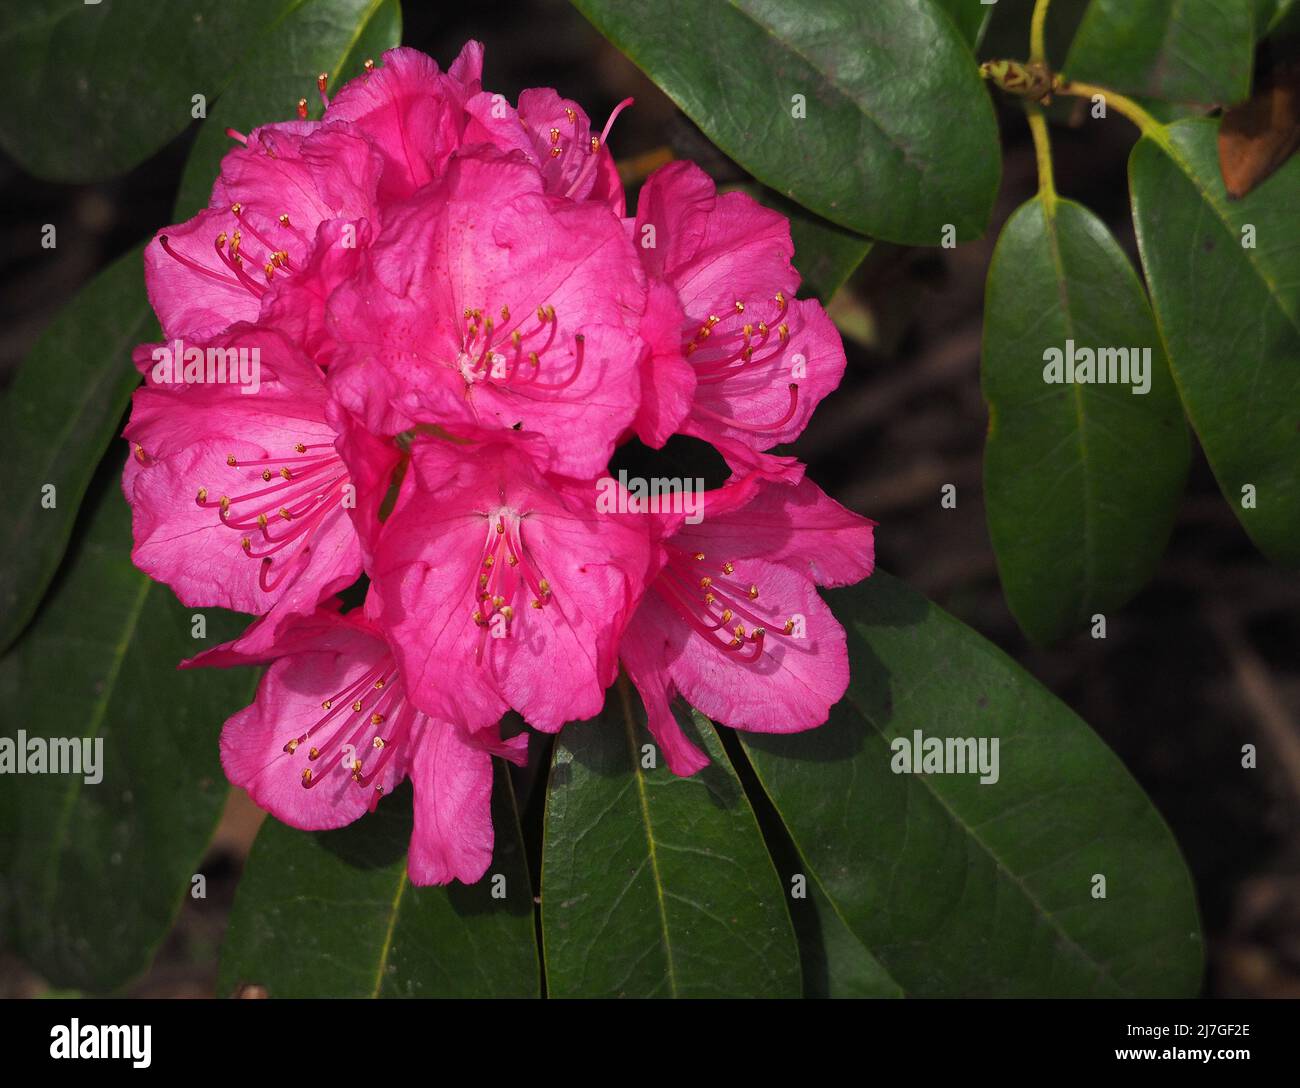 Close up of a large deep pink rhododendron flower blooming in an English Woodland garden in April, Lancashire, England, UK. Stock Photo